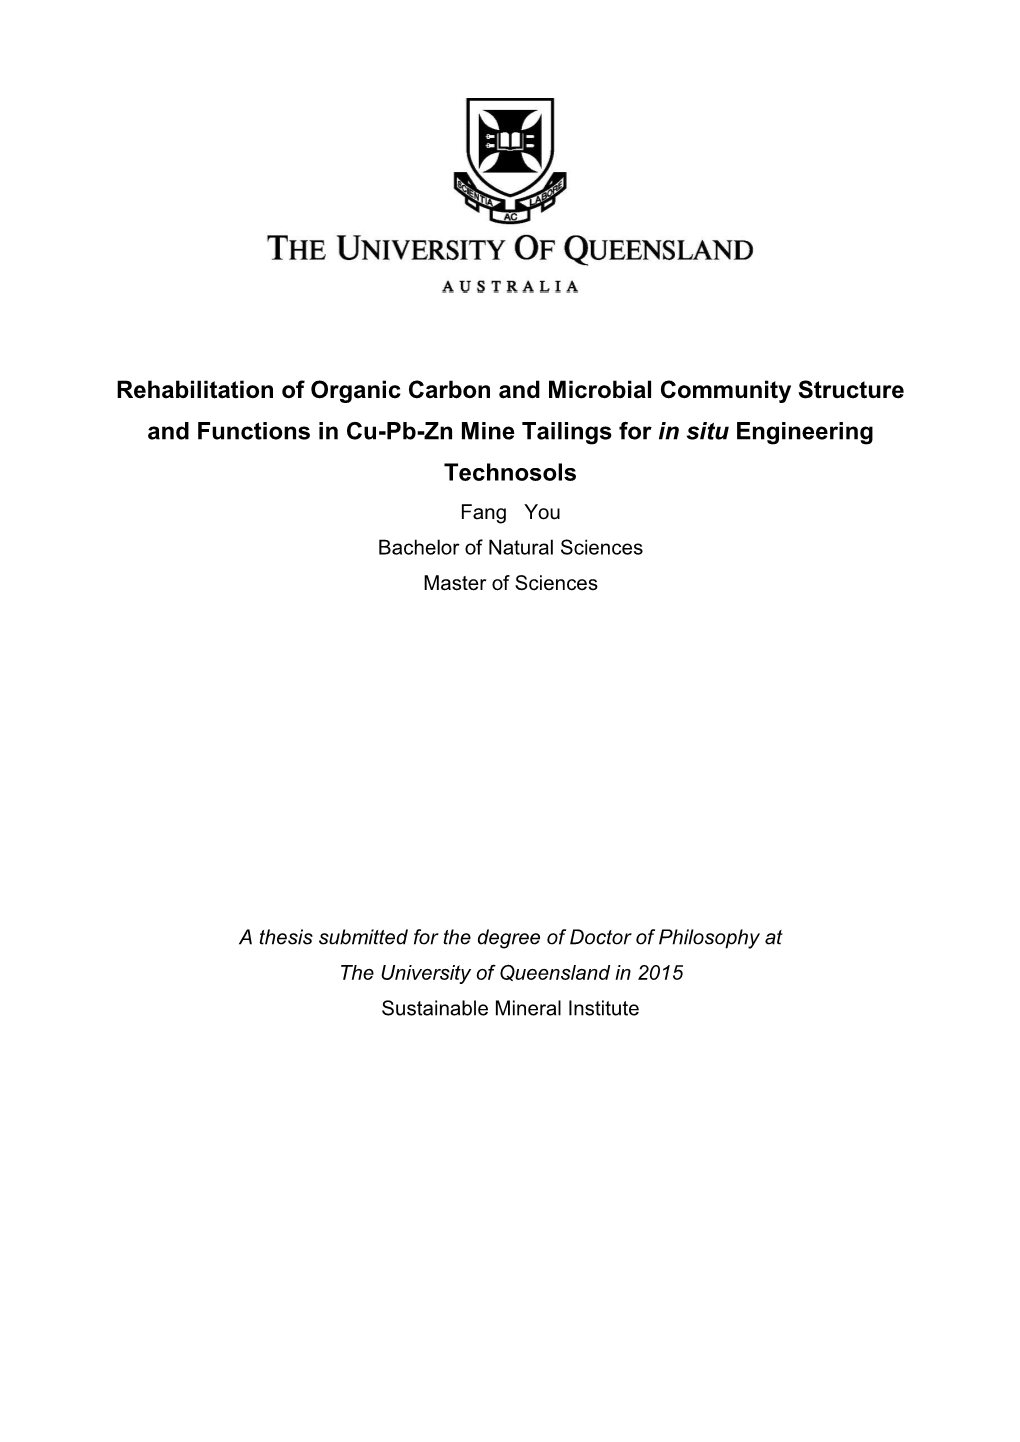 Rehabilitation of Organic Carbon and Microbial Community Structure And